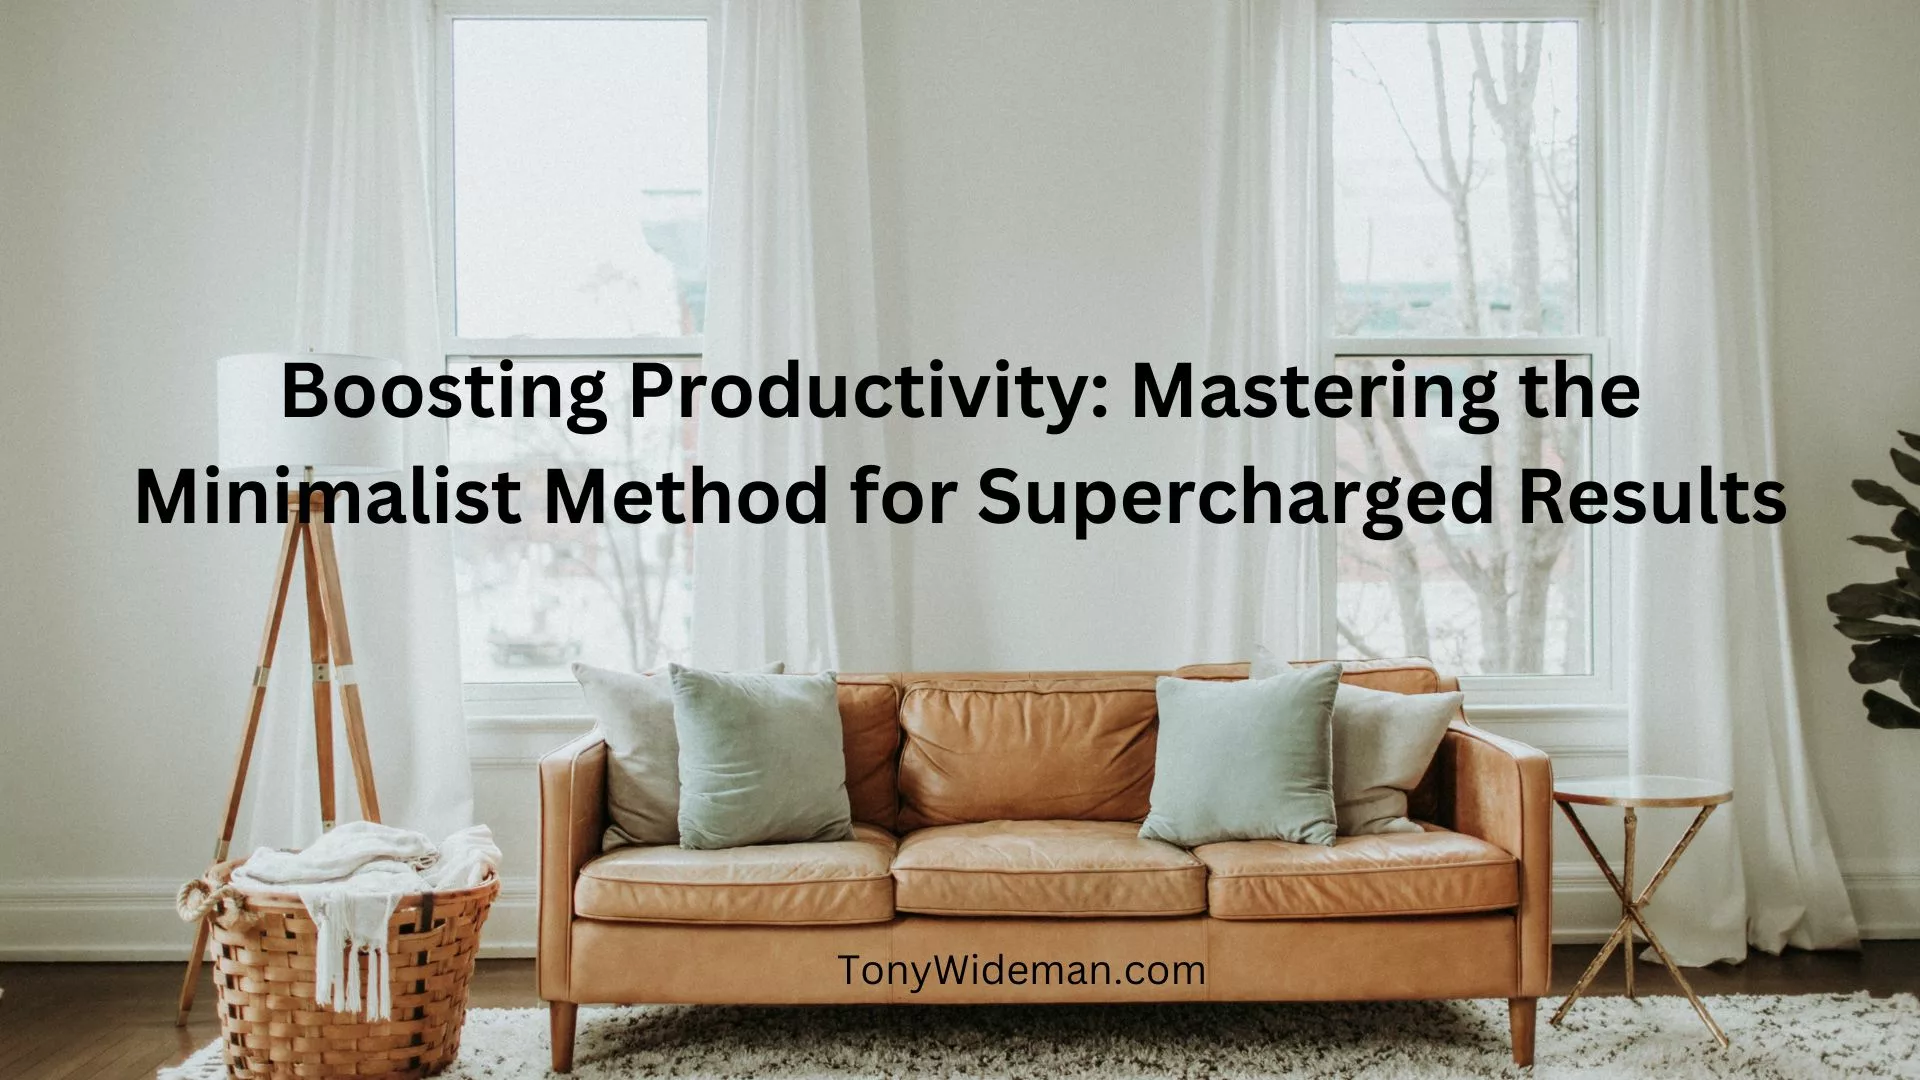 Boosting Productivity: Mastering the Minimalist Method for Supercharged Results